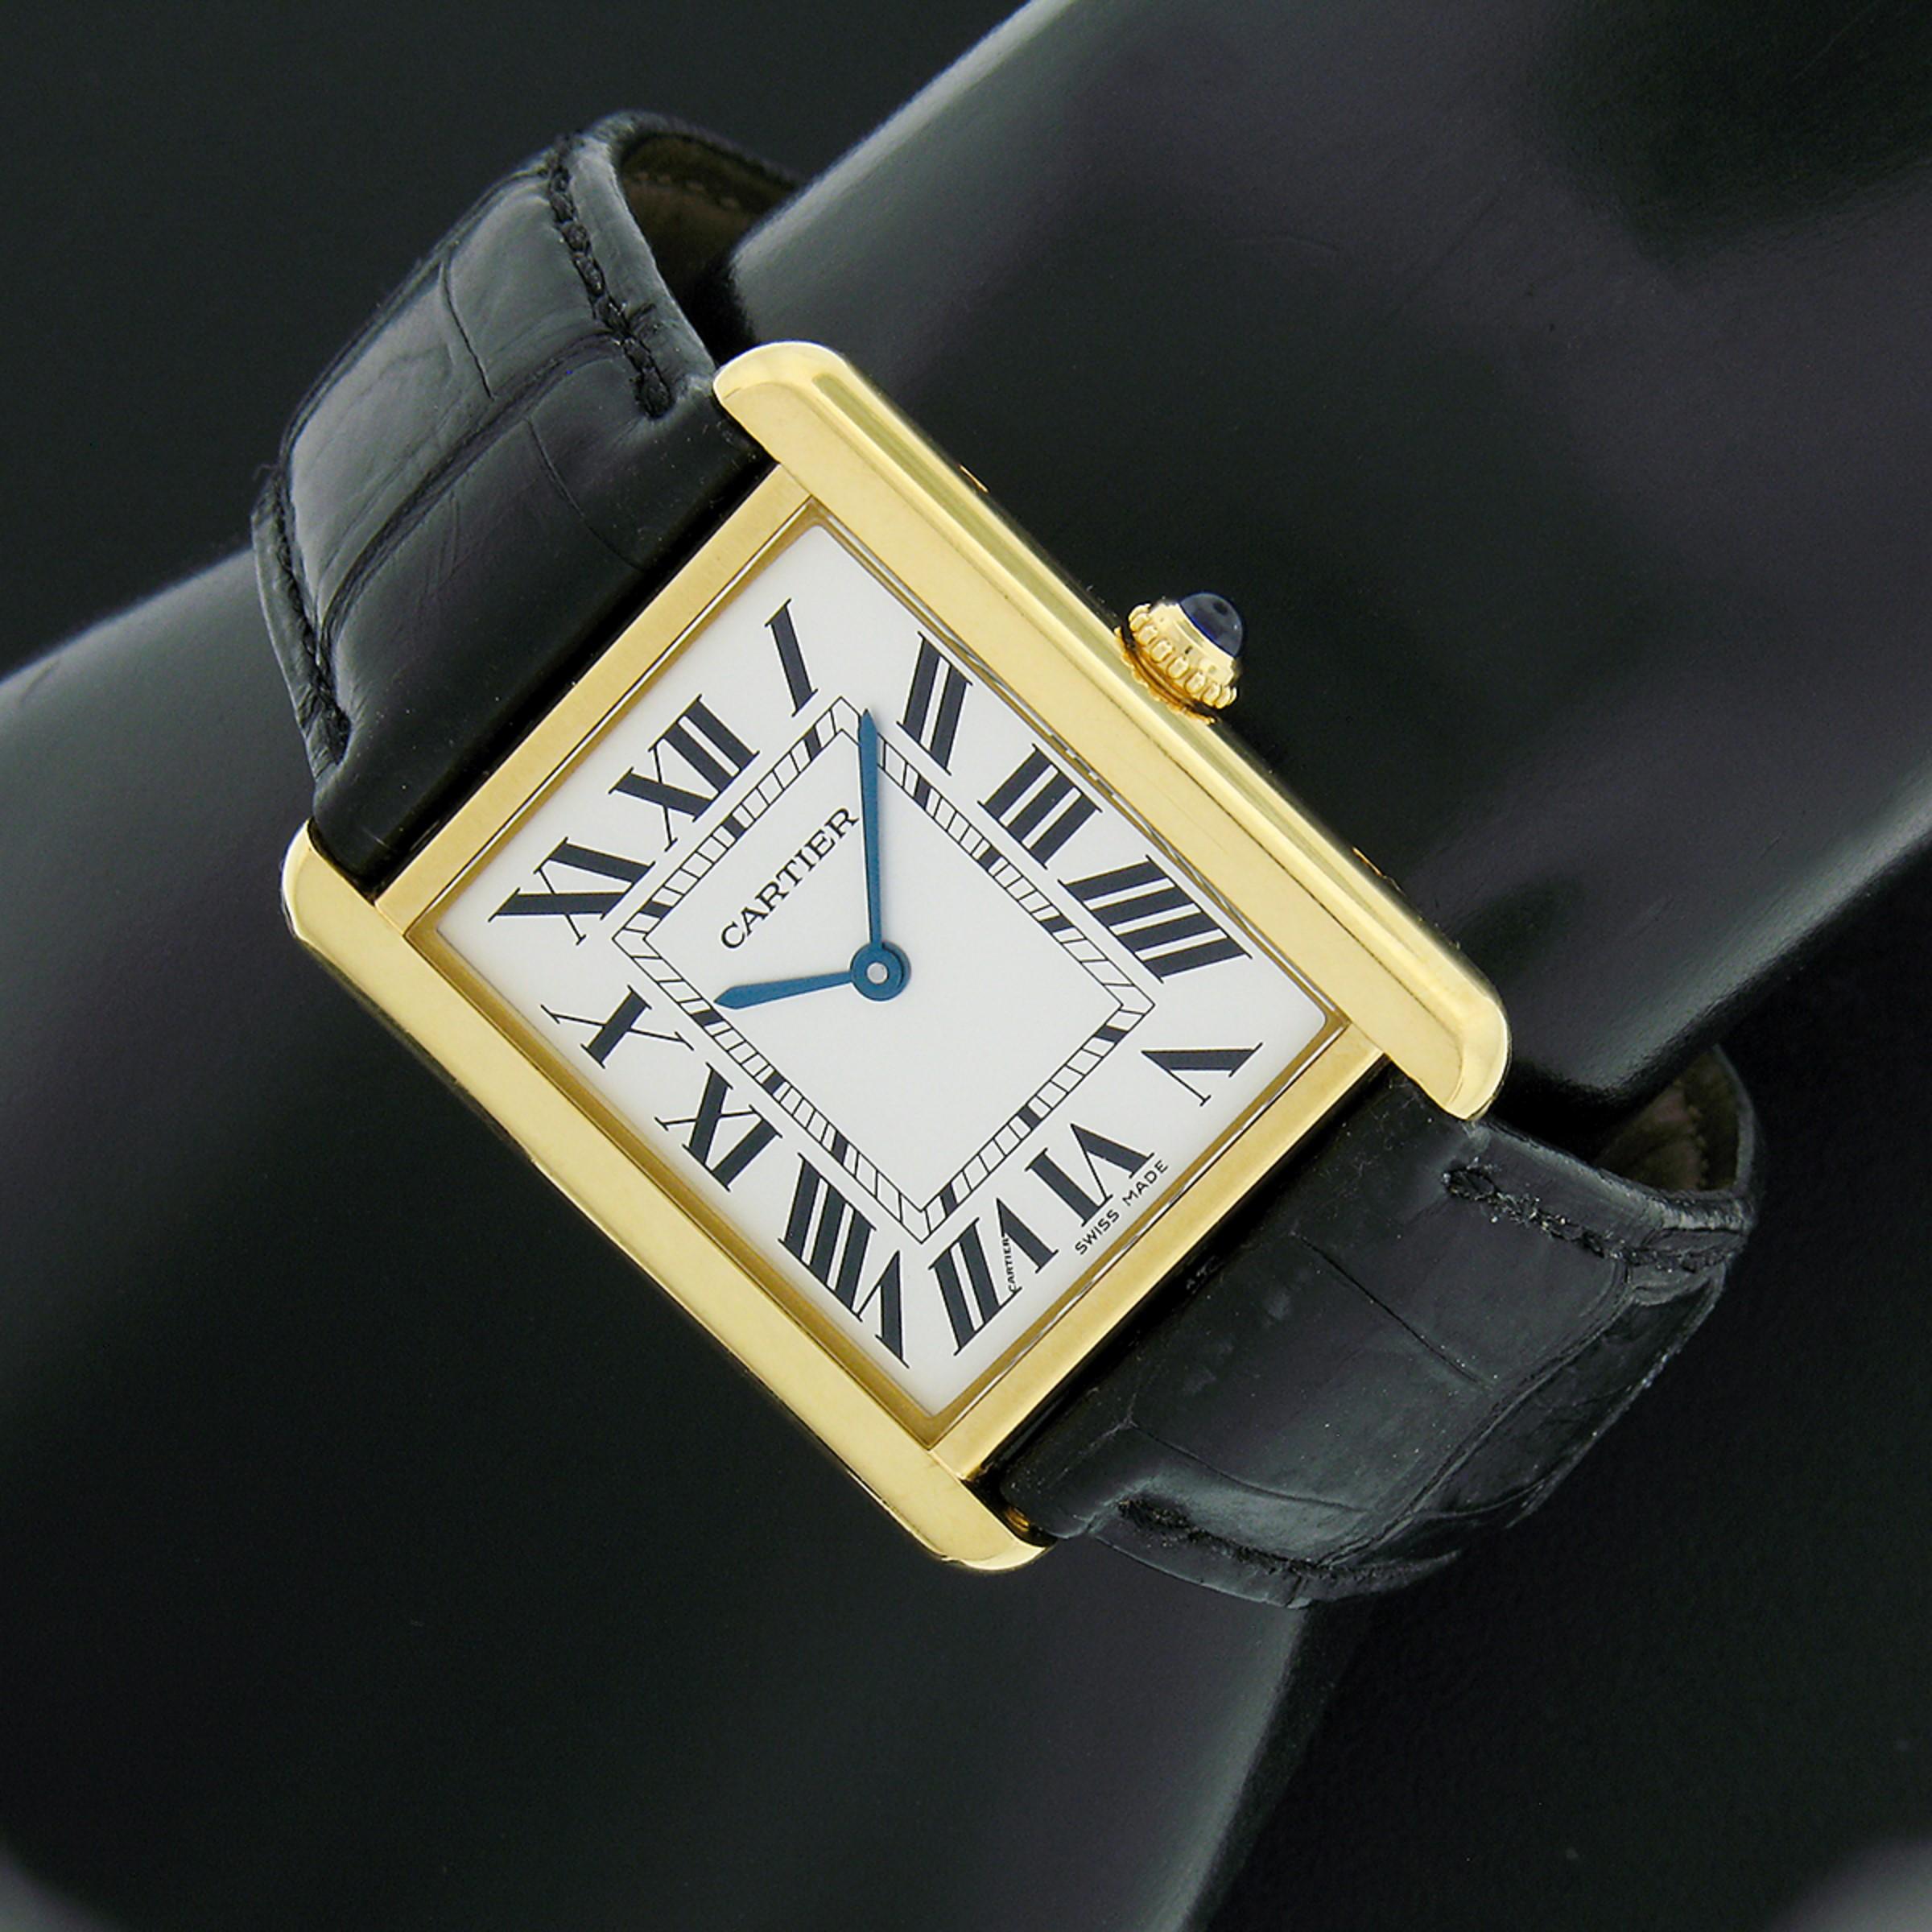 Here we have a gorgeous, 100% authentic, Cartier Tank Solo wrist watch. The case was crafted from solid 18k yellow gold with a stainless steel backing. This watch features a Swiss-made quartz movement which keeps accurate time. The silver-tone black